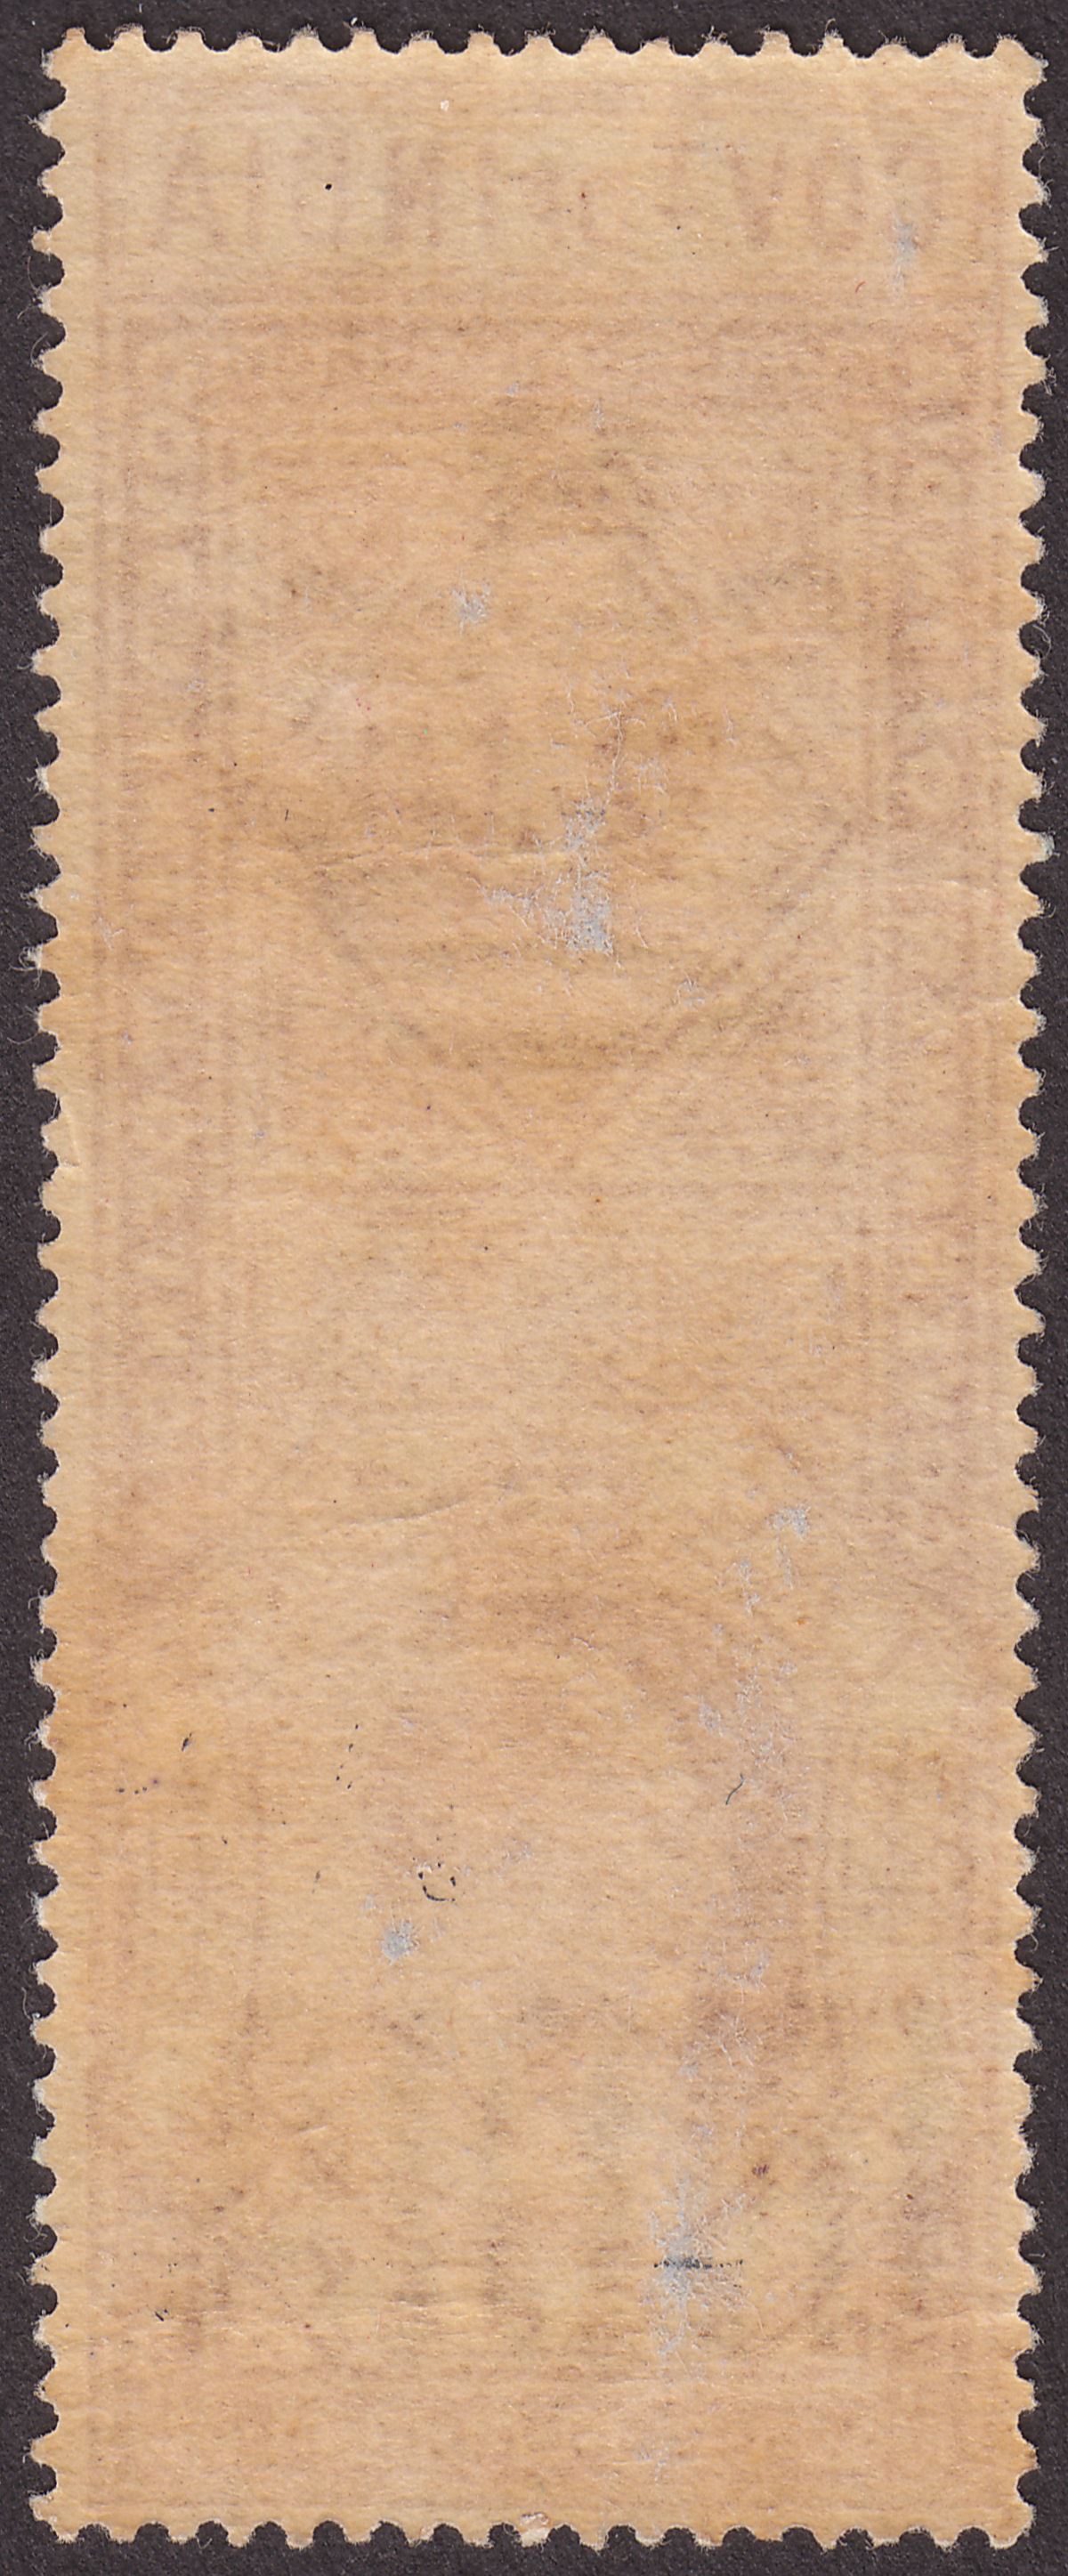 India 1904 KEVII Telegraph Stamp 2a Maroon Mint SG T57 cat £26